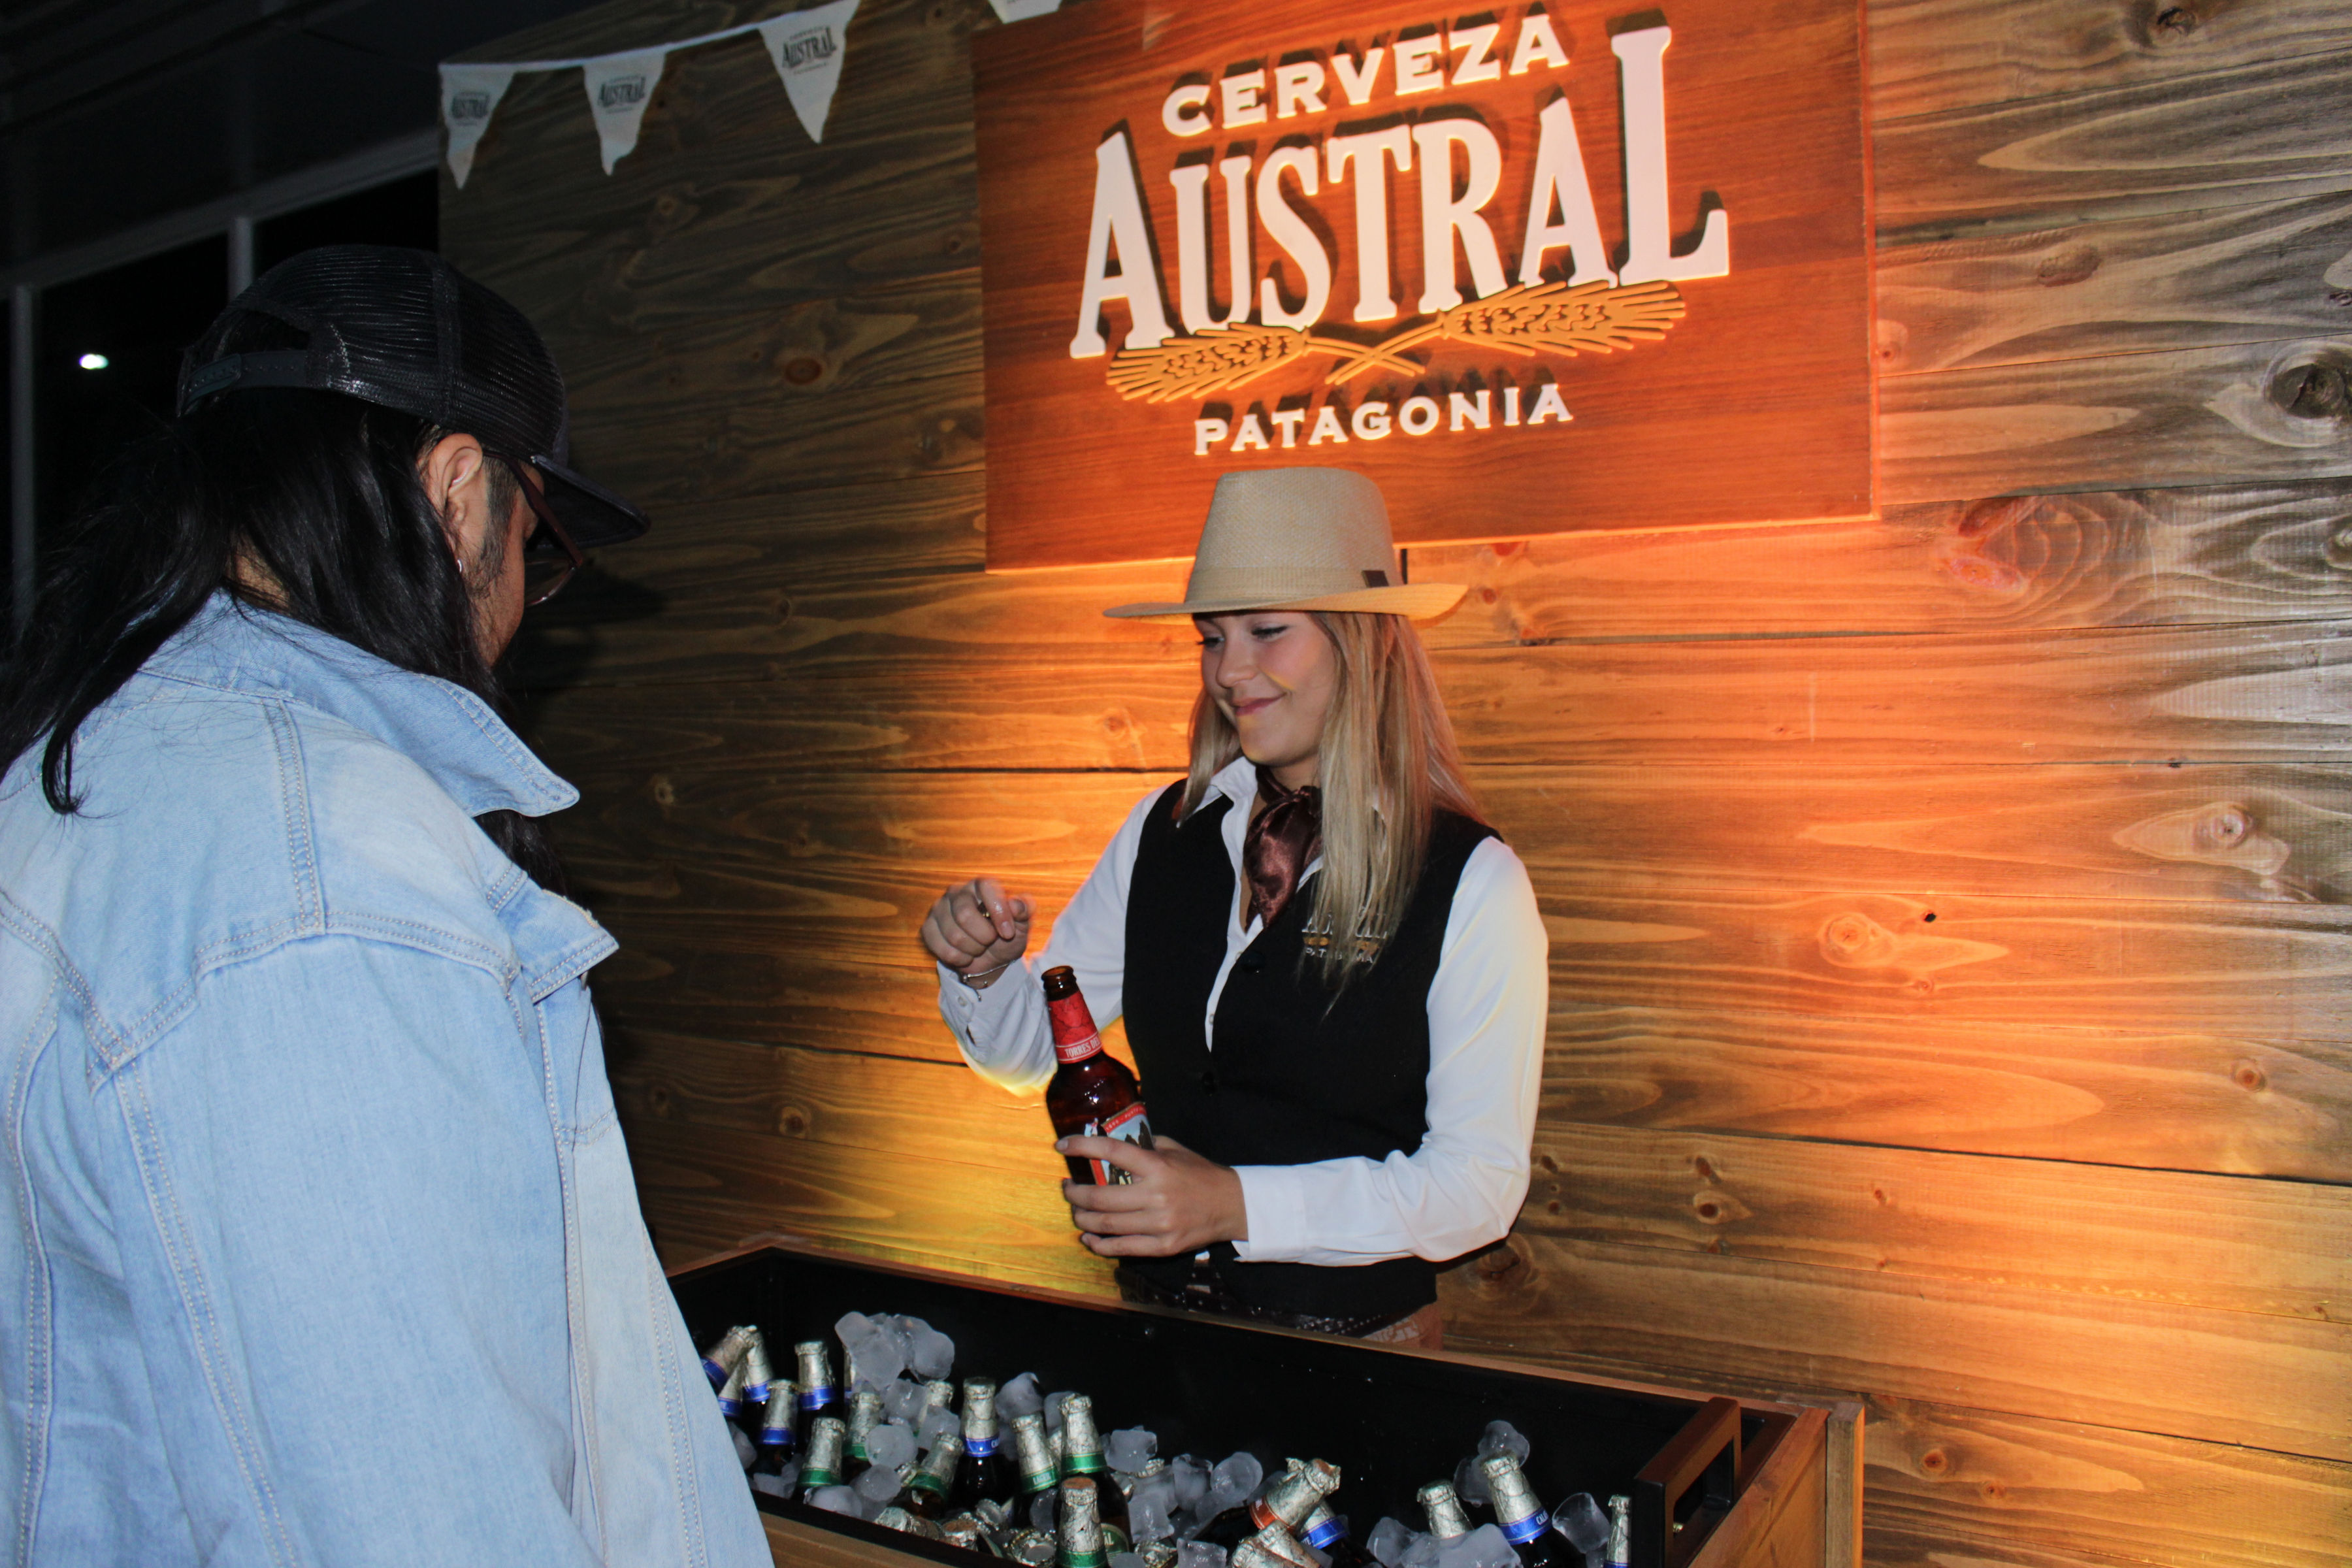 Cerveza Austral provided free beers for attendees. 